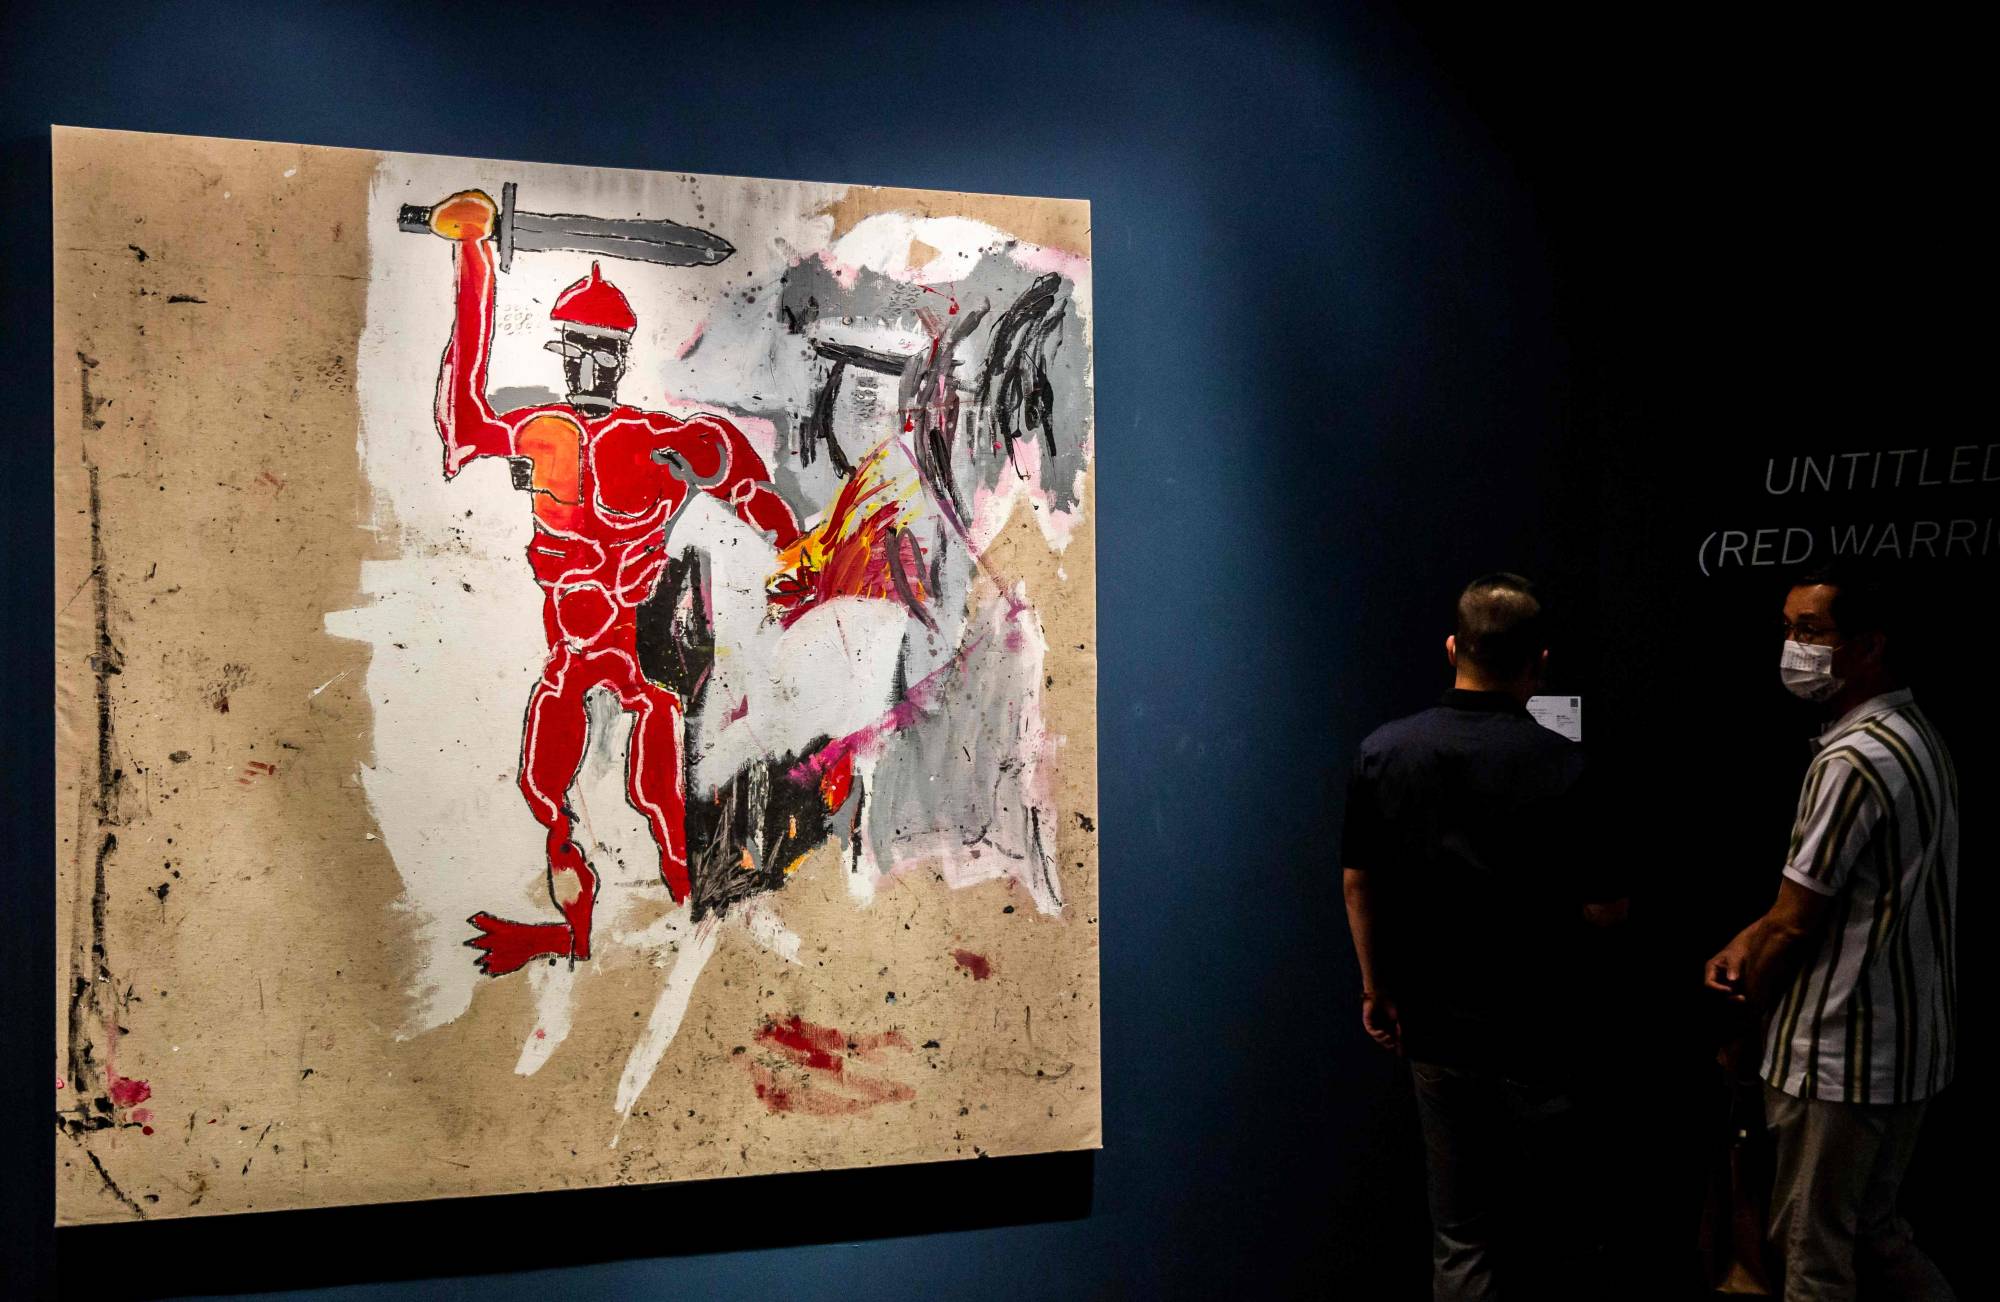 There has been a rising interest over the past five years among Asian buyers in purchasing Western artists. In Hong Kong, “Untitled (Red Warrior)” by Jean-Michel Basquiat sold for about $21 million at Sotheby’s autumn sale featuring rare artworks, jewellery and ceramics. | ISAAC LAWRENCE / AFP-JIJI